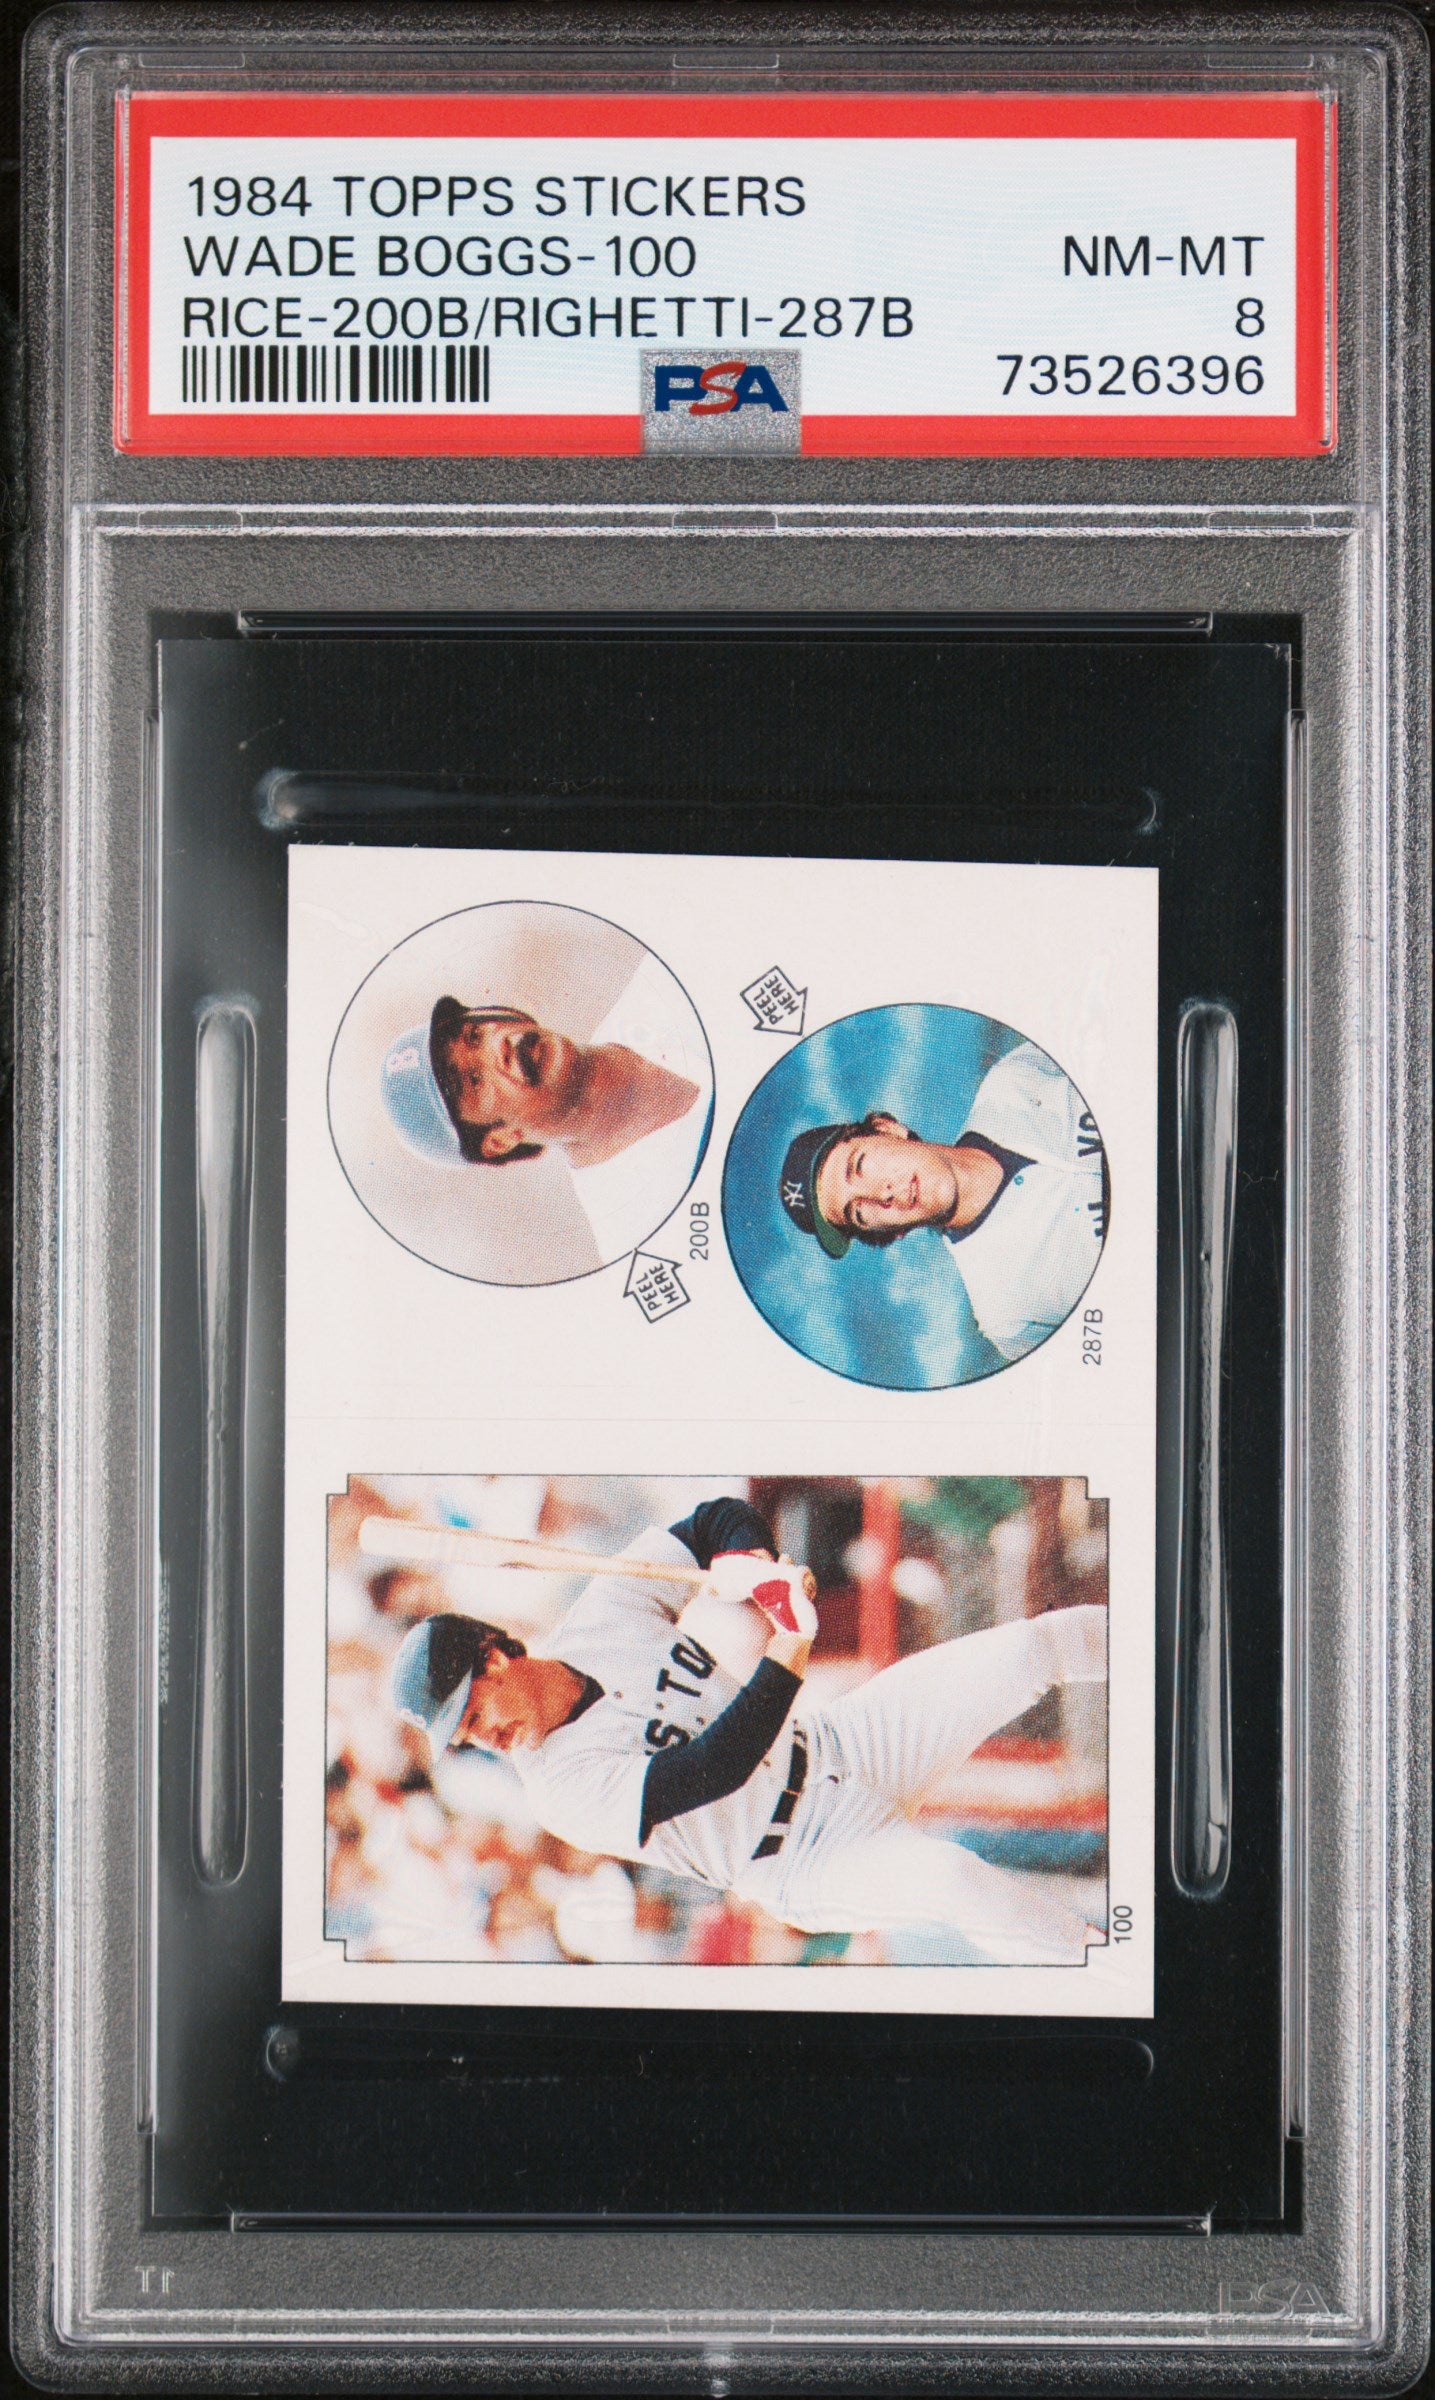 1984 Topps Stickers Baseball Wade Boggs-100 Psa 8 73526396